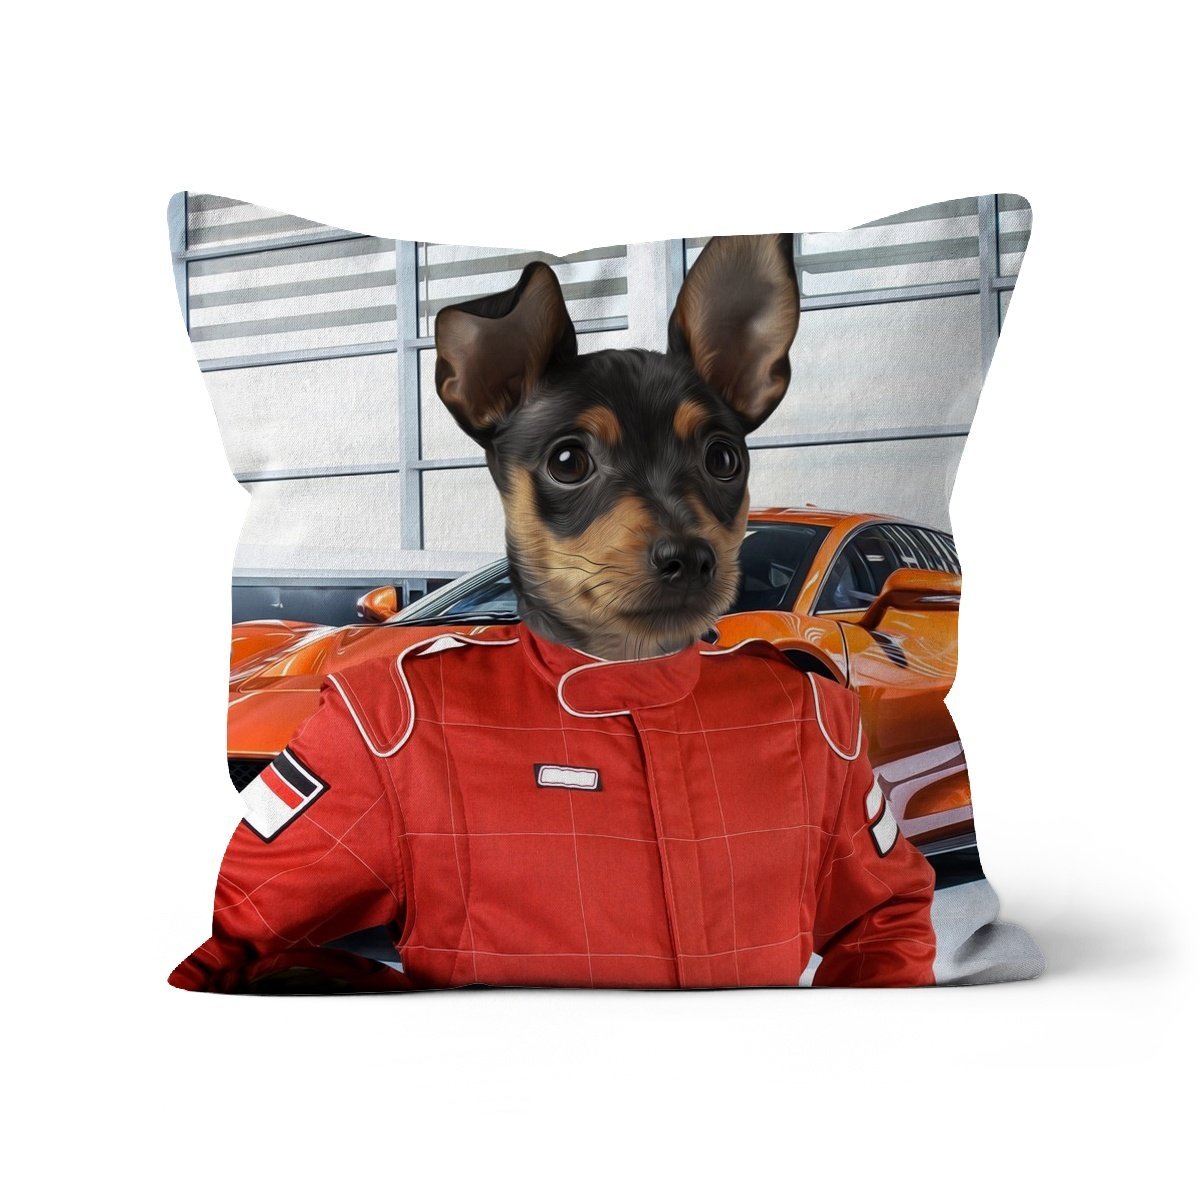 The Nascar Racer: Custom Pet Cushion - Paw & Glory - #pet portraits# - #dog portraits# - #pet portraits uk#paw & glory, pet portraits pillow,dog pillows personalized, pet face pillows, dog photo on pillow, custom cat pillows, pillow with pet picture